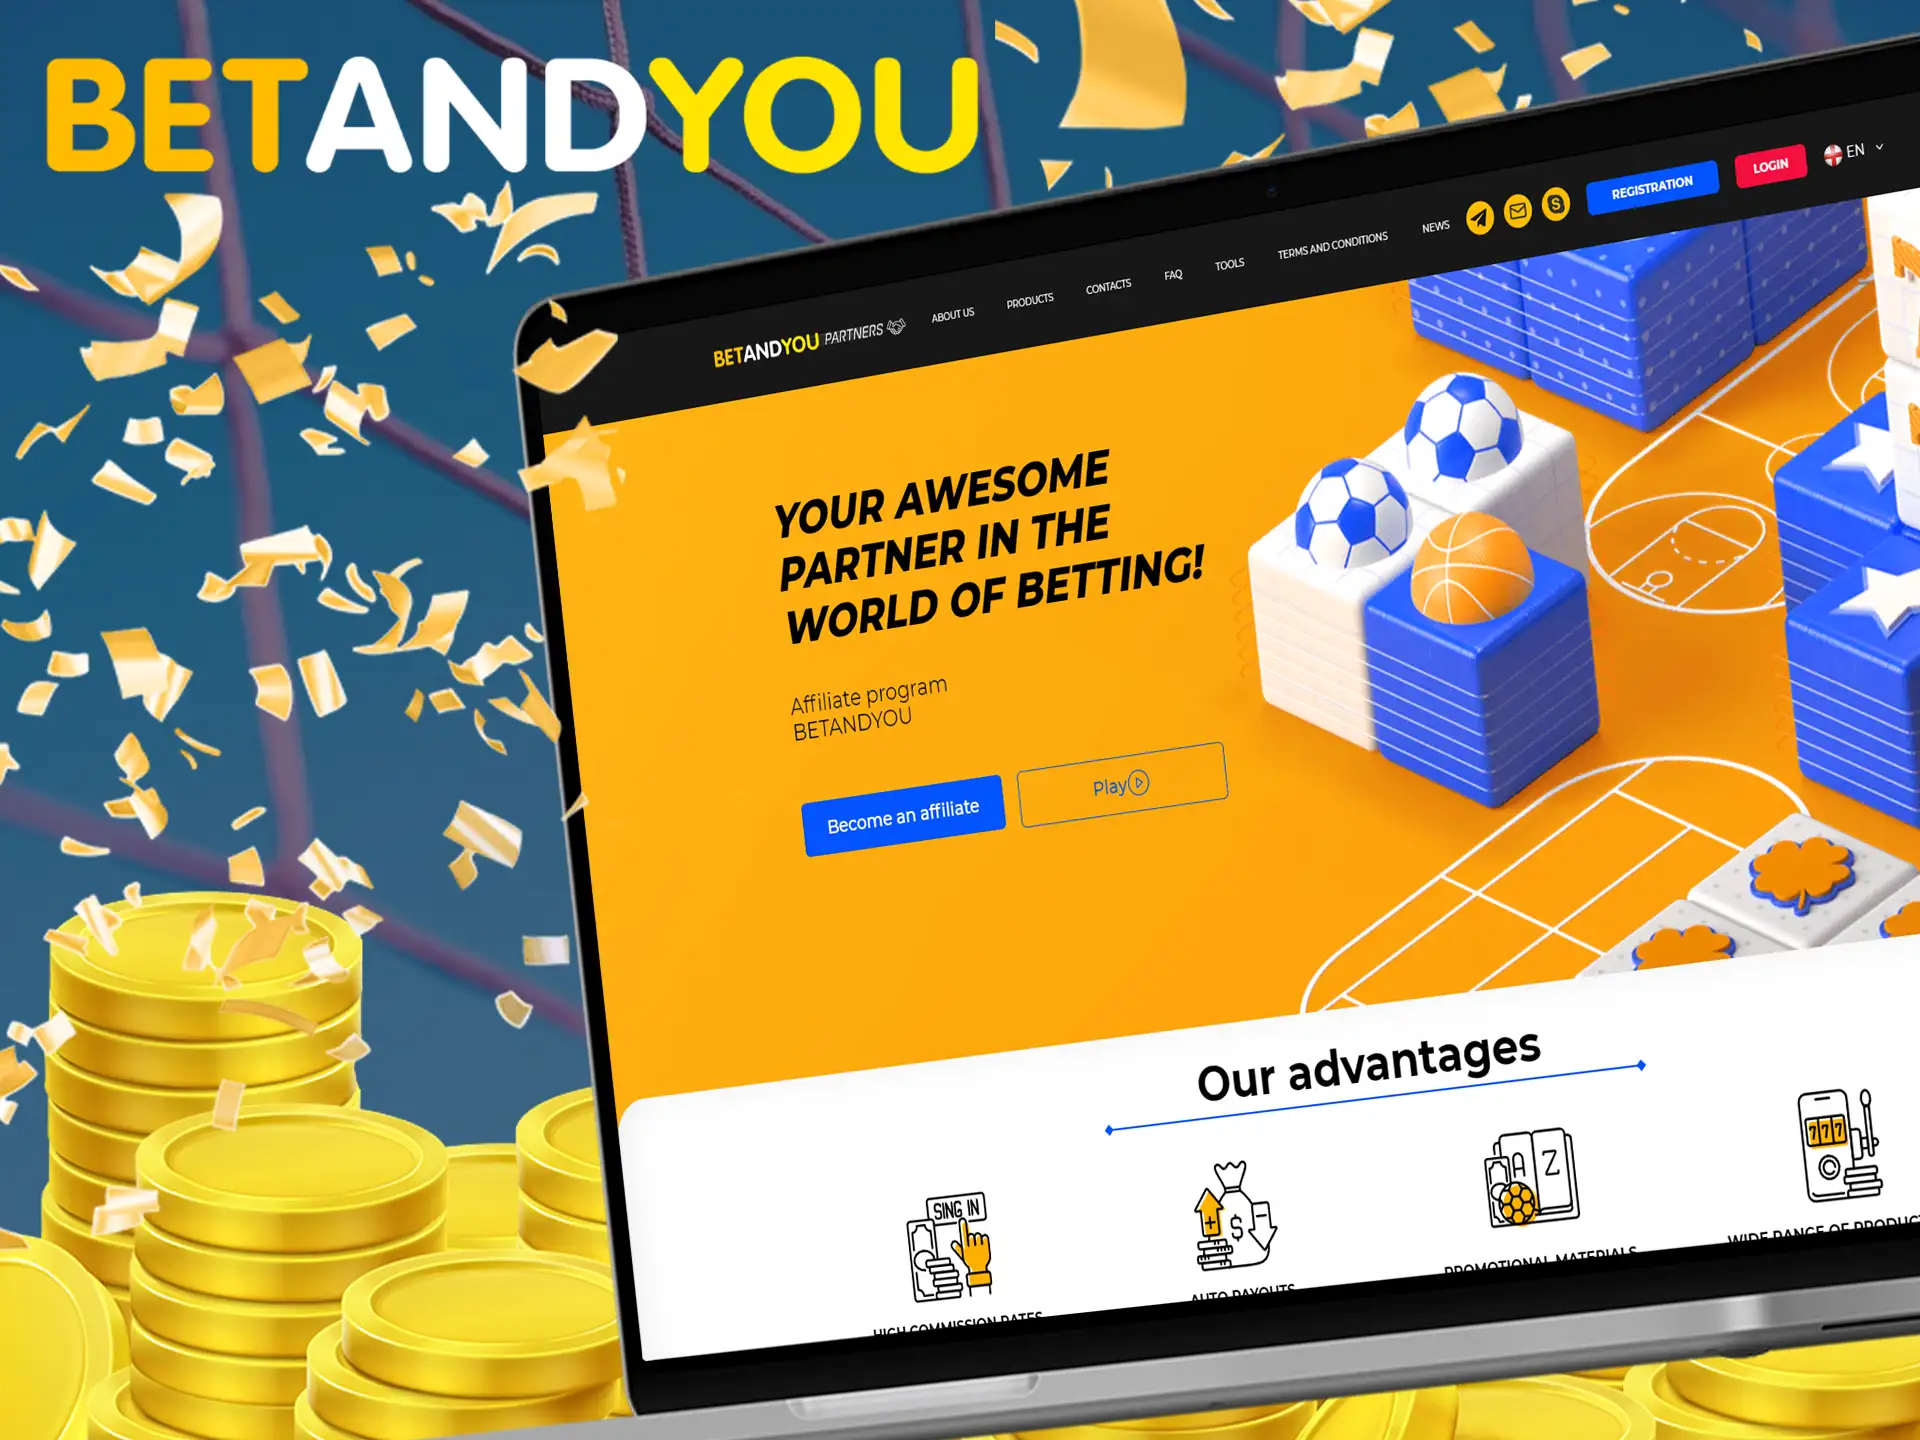 Take part in the referral program at Betandyou casino and receive additional bonuses.